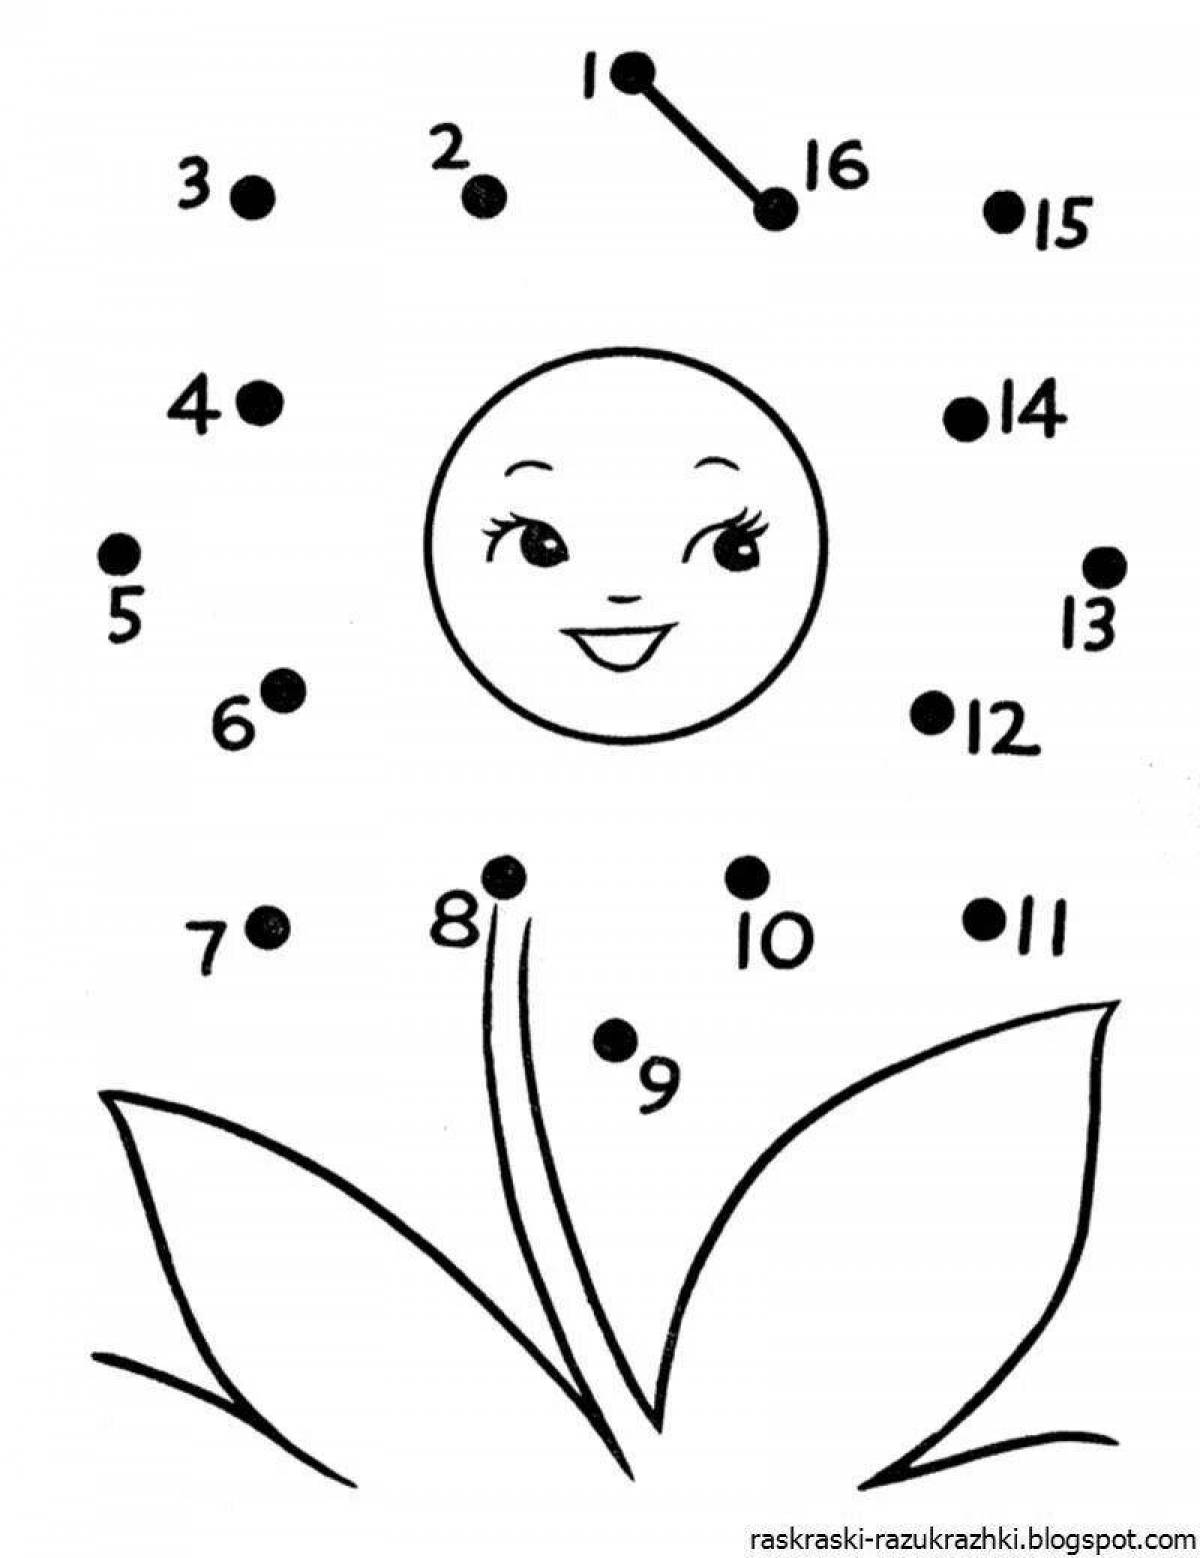 Dot-to-Dot for 5 year olds #10